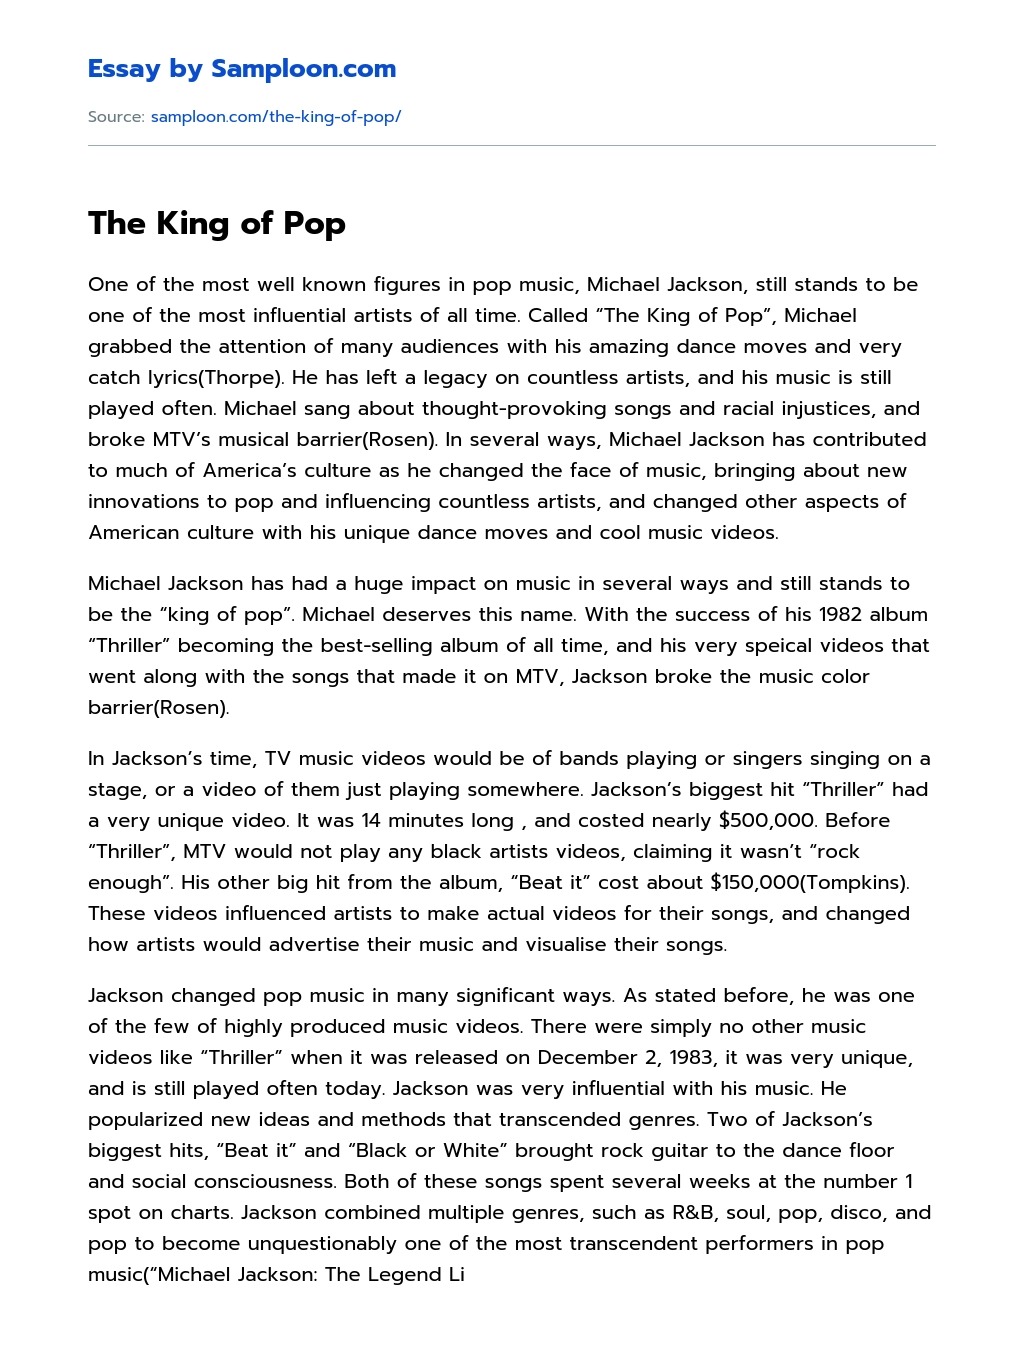 The King of Pop essay